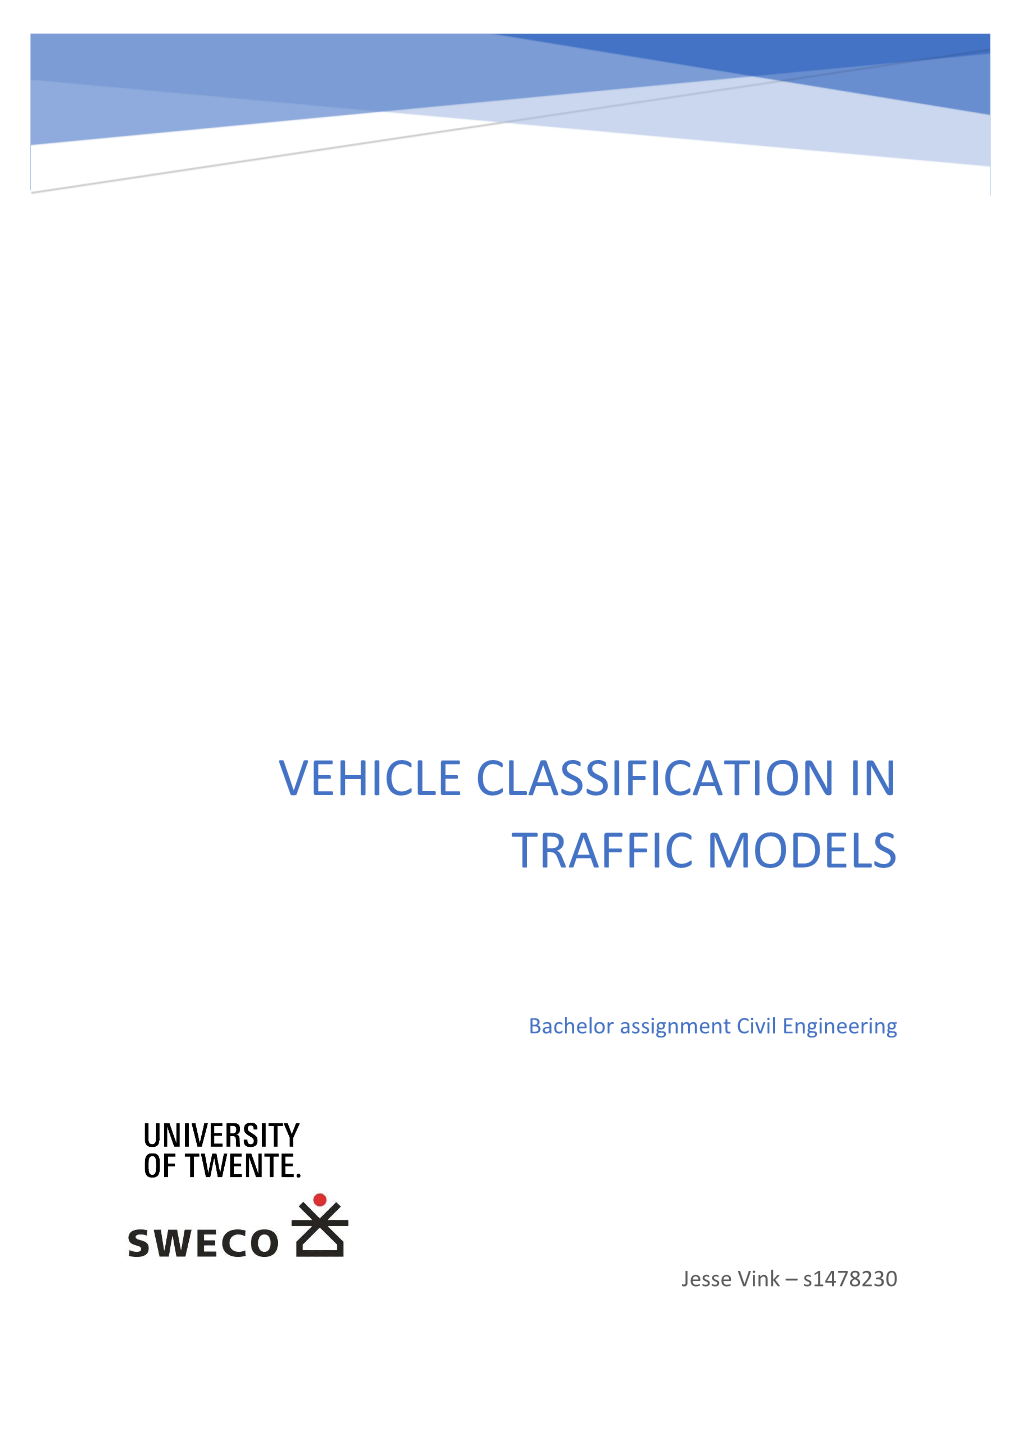 Vehicle Classification in Traffic Models